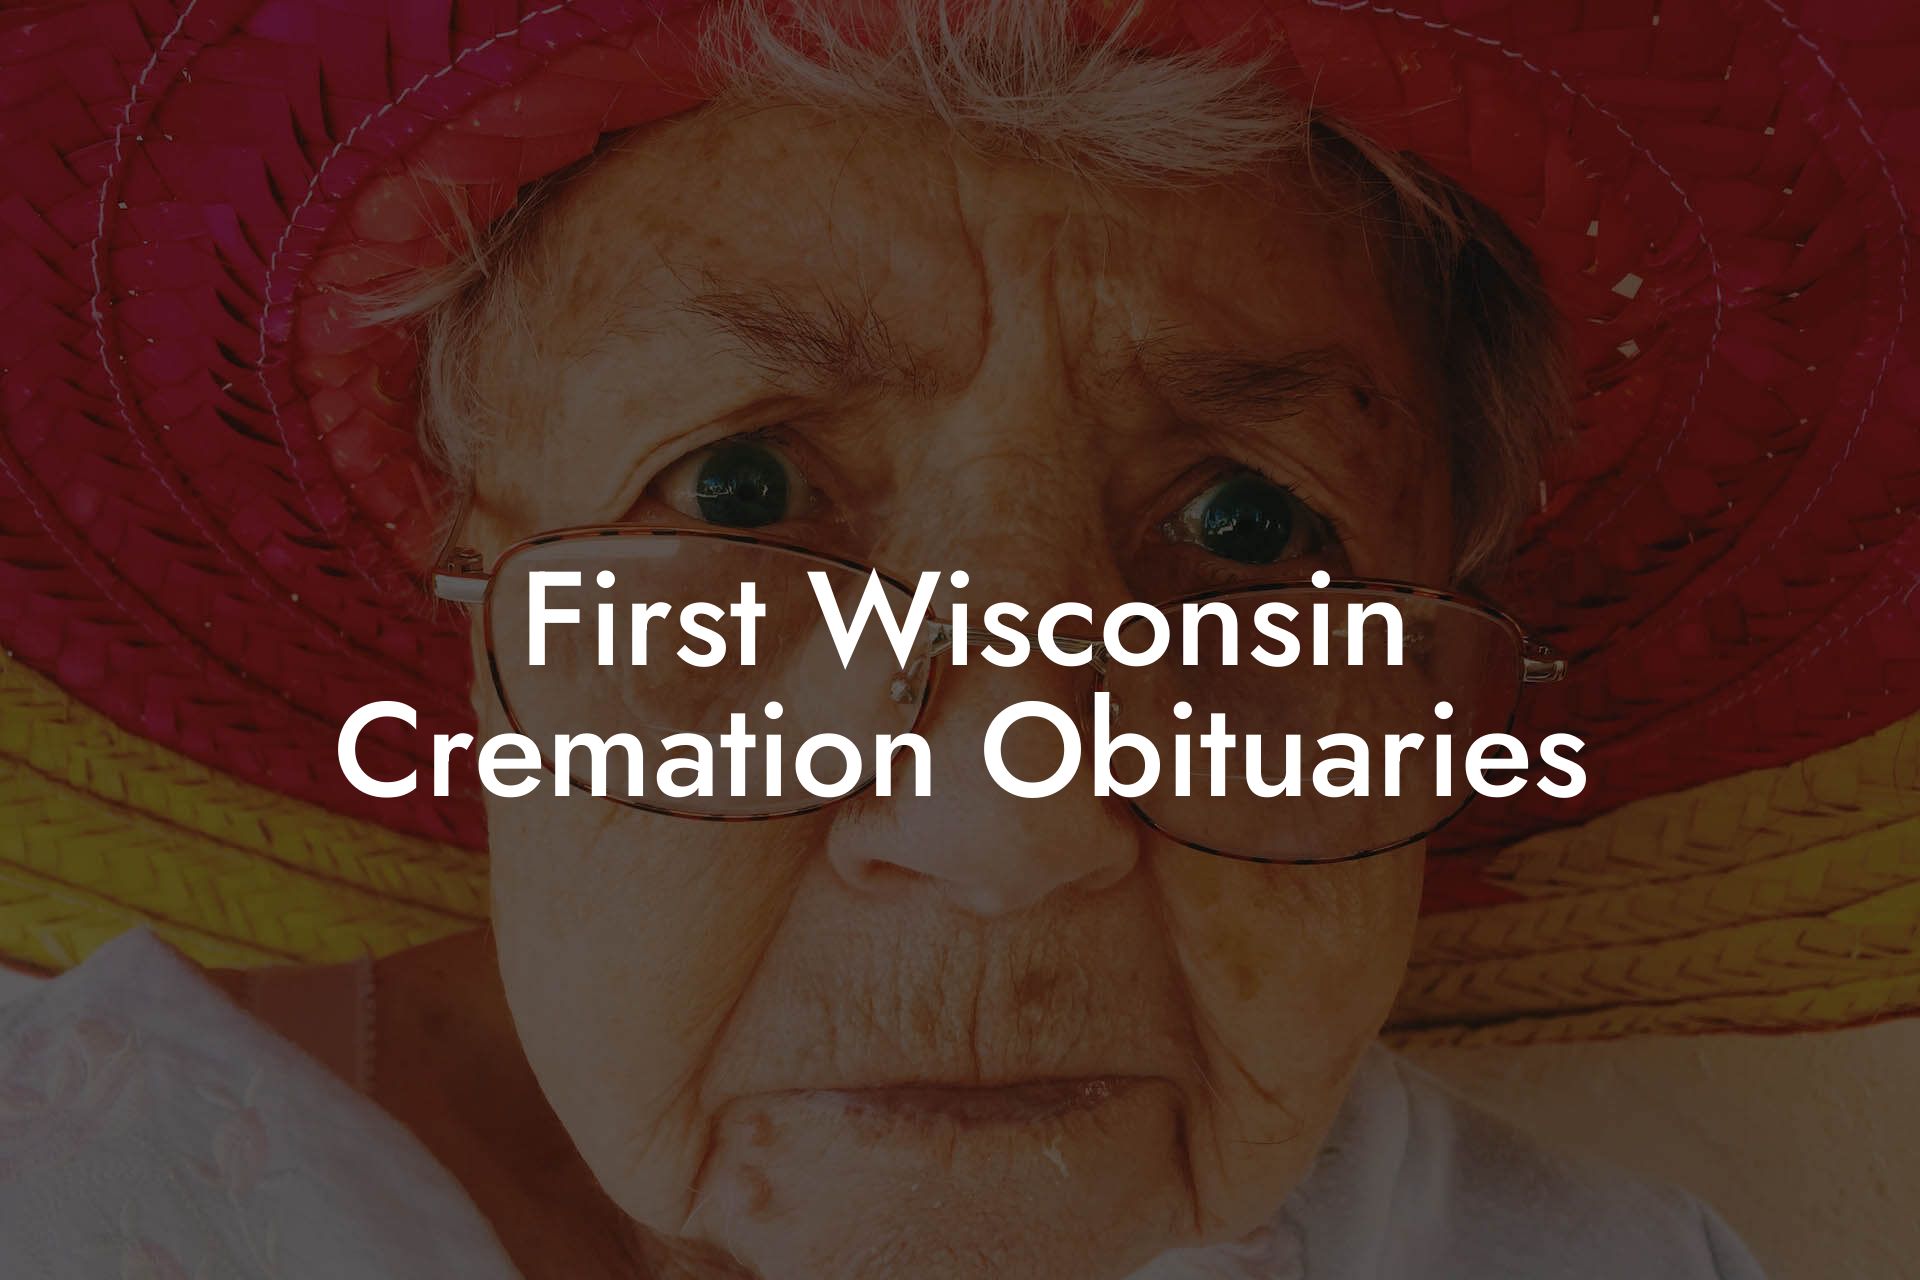 First Wisconsin Cremation Obituaries